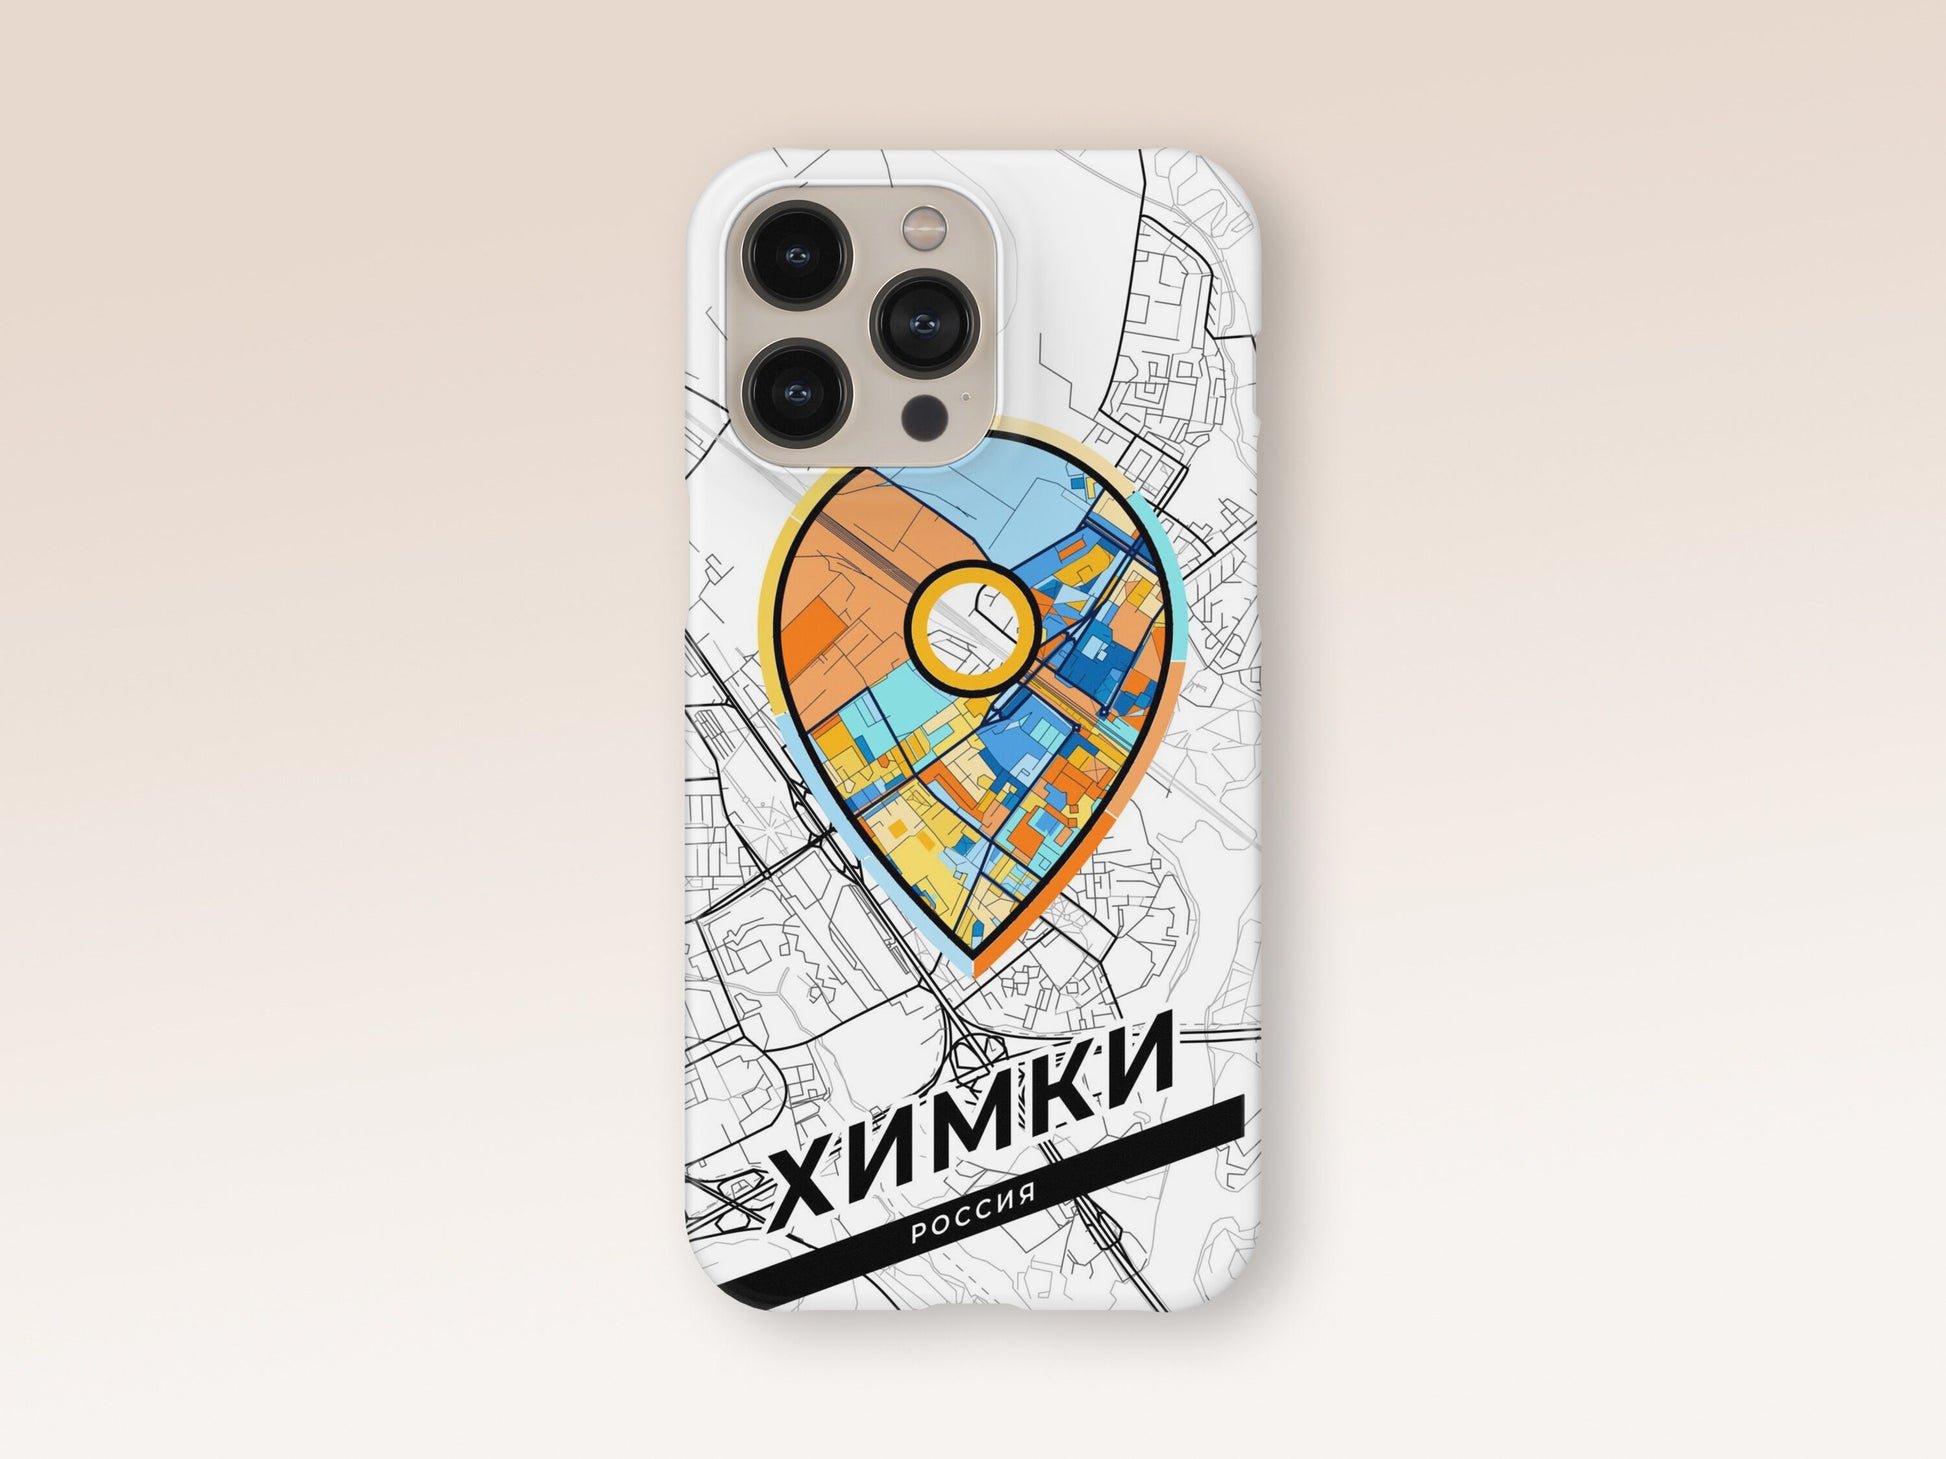 Khimki Russia slim phone case with colorful icon. Birthday, wedding or housewarming gift. Couple match cases. 1